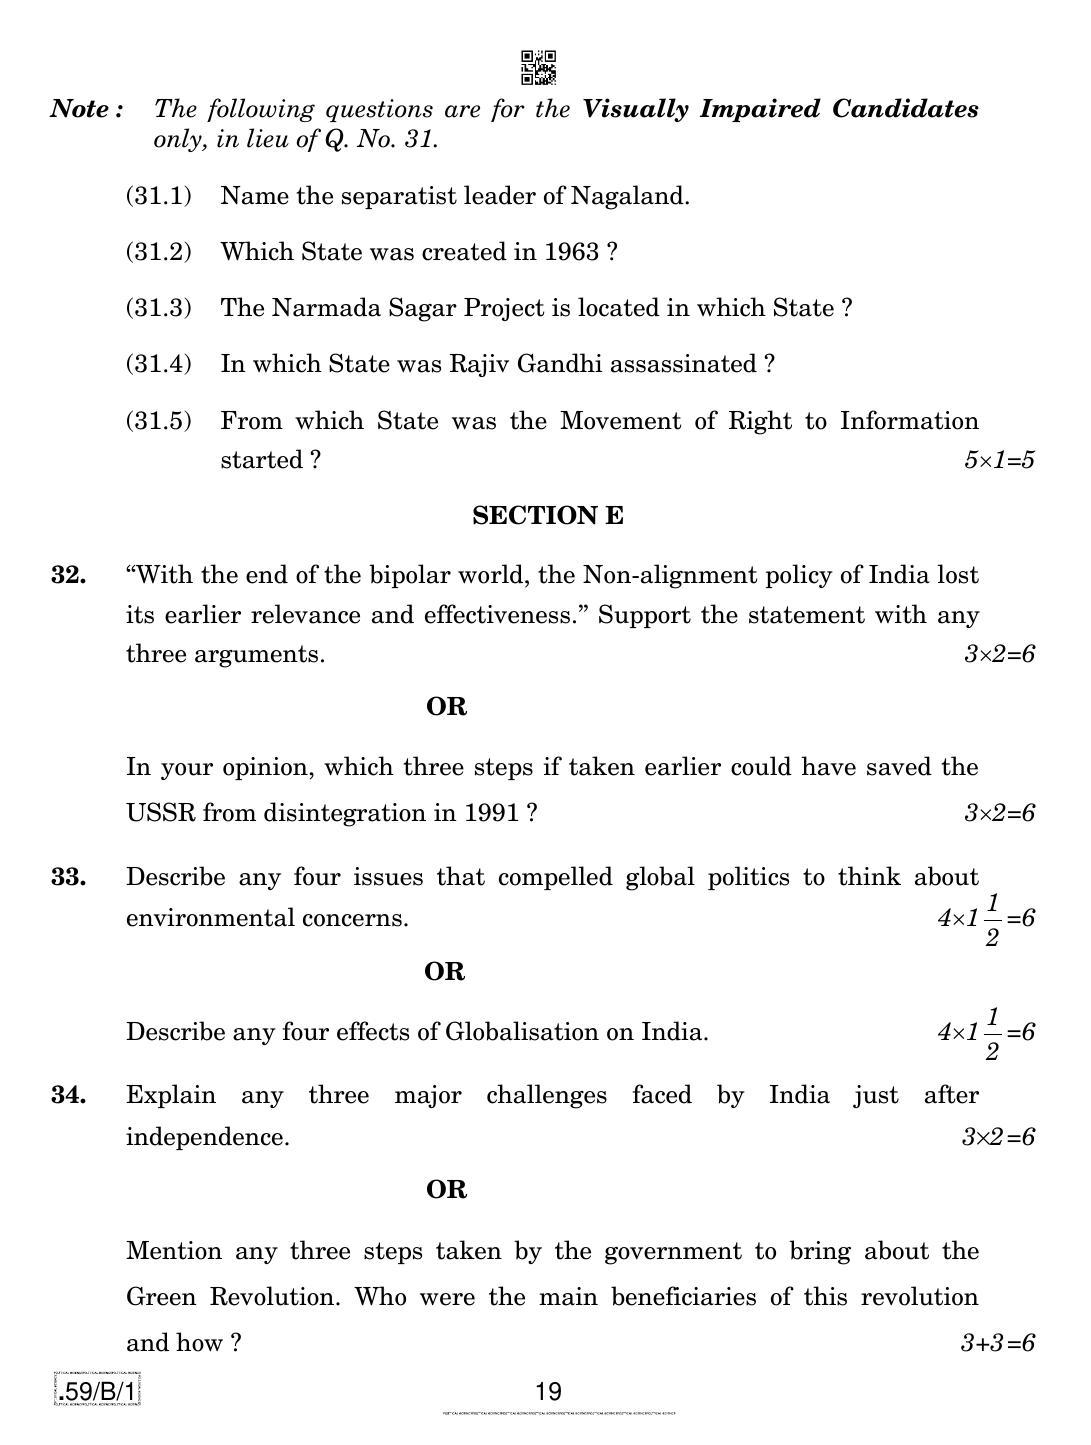 CBSE Class 12 59-C-1 - Political Science 2020 Compartment Question Paper - Page 19